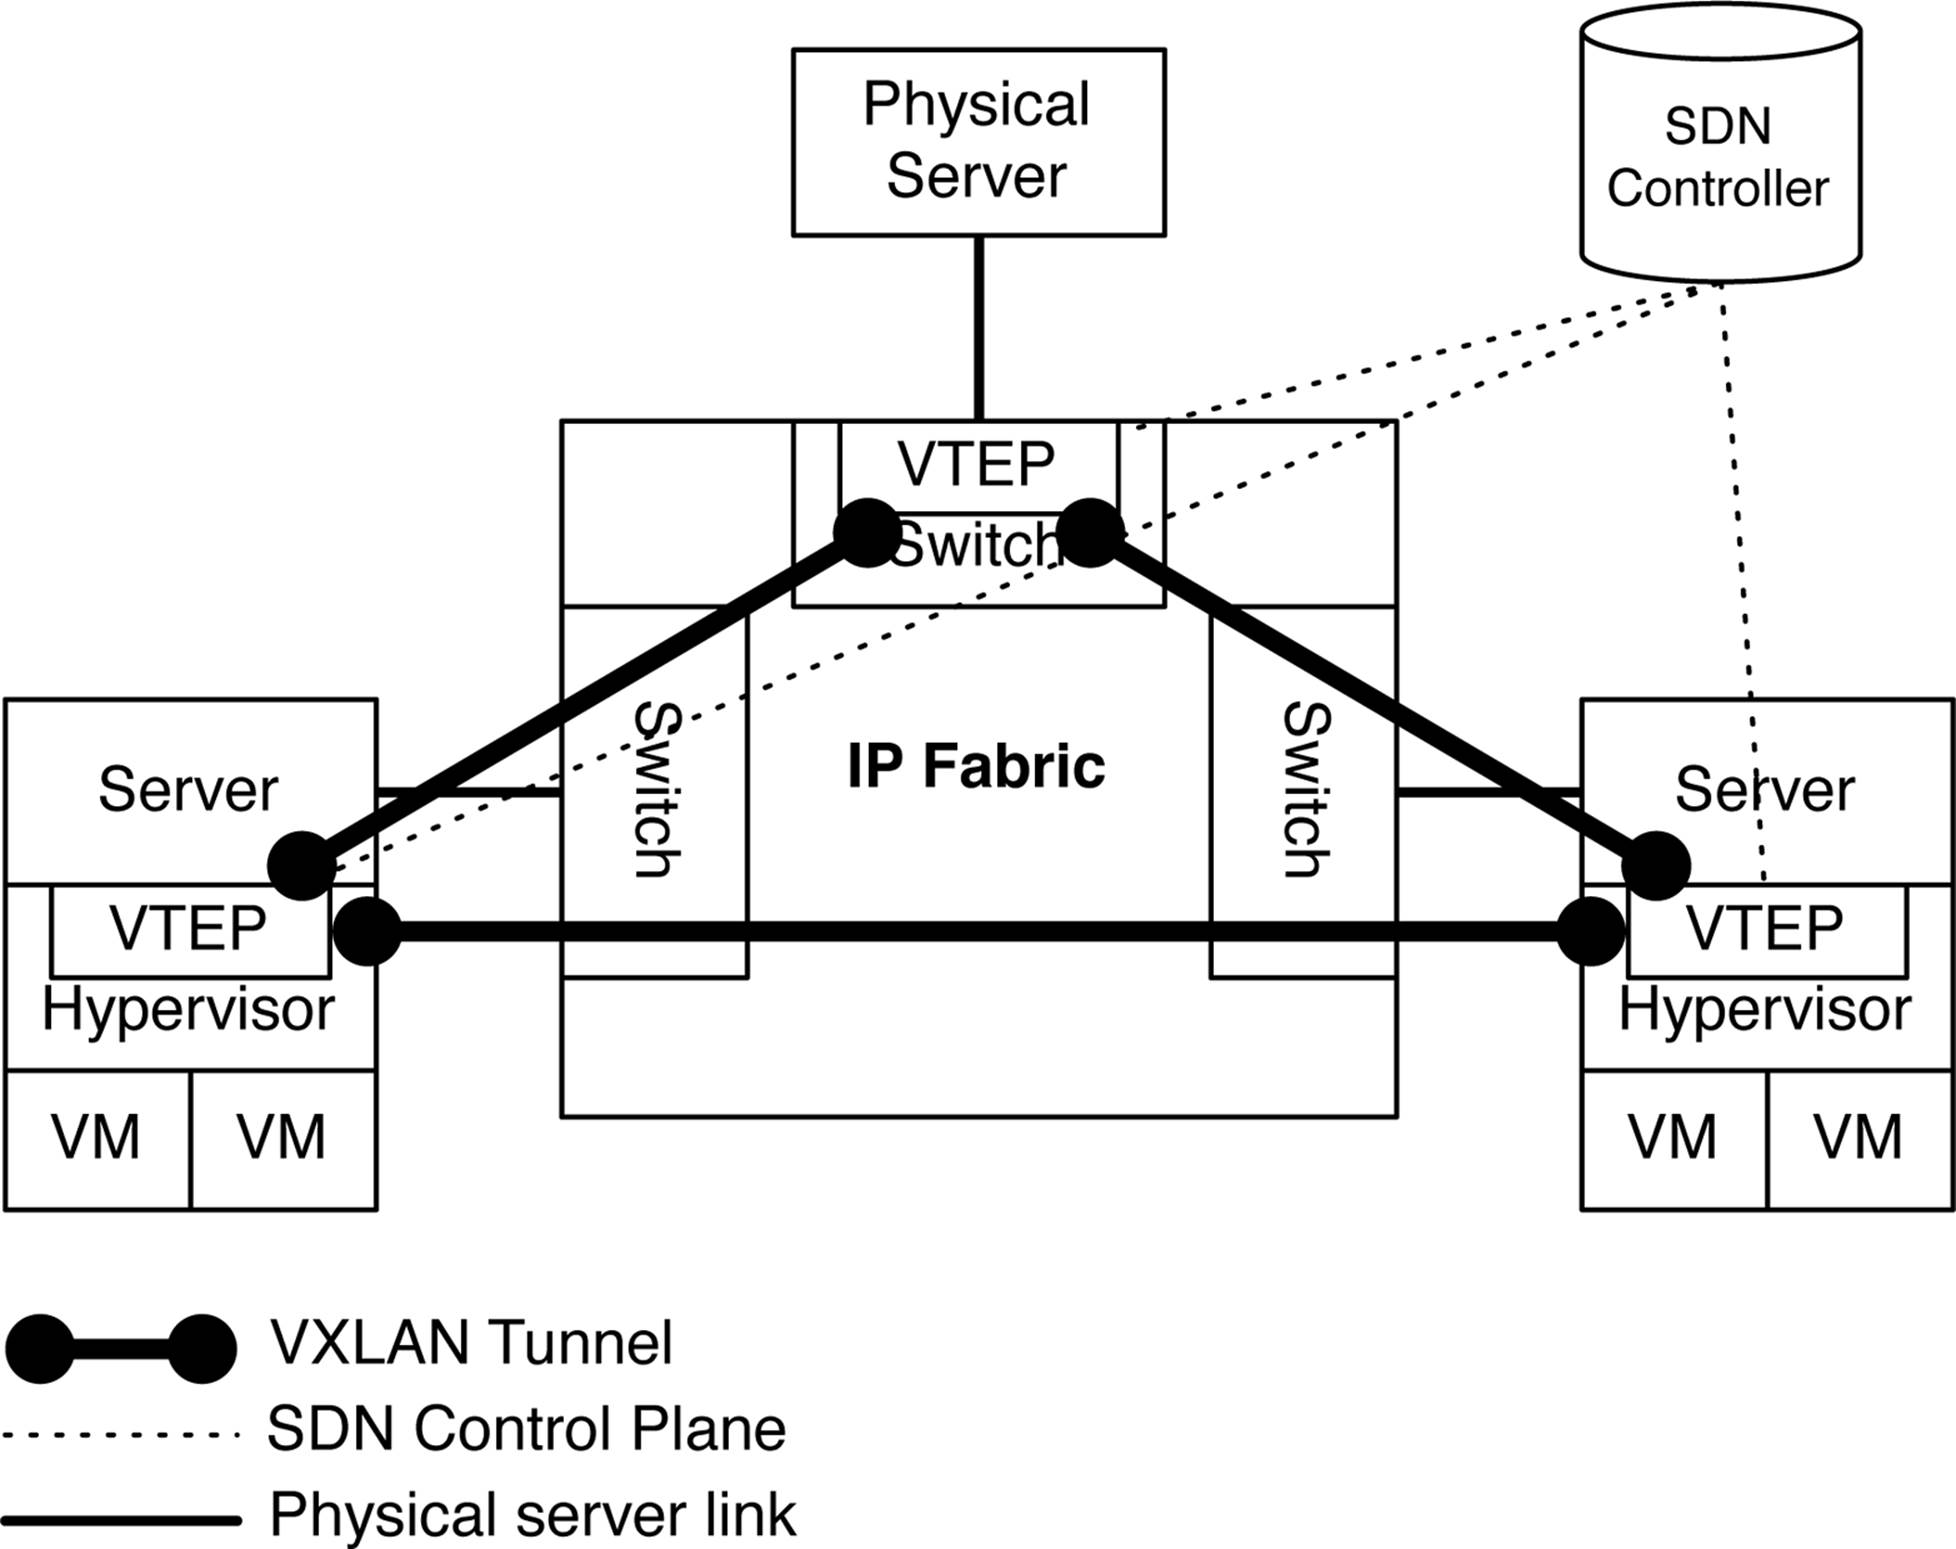 Virtual-to-physical data flow in an overlay architecture